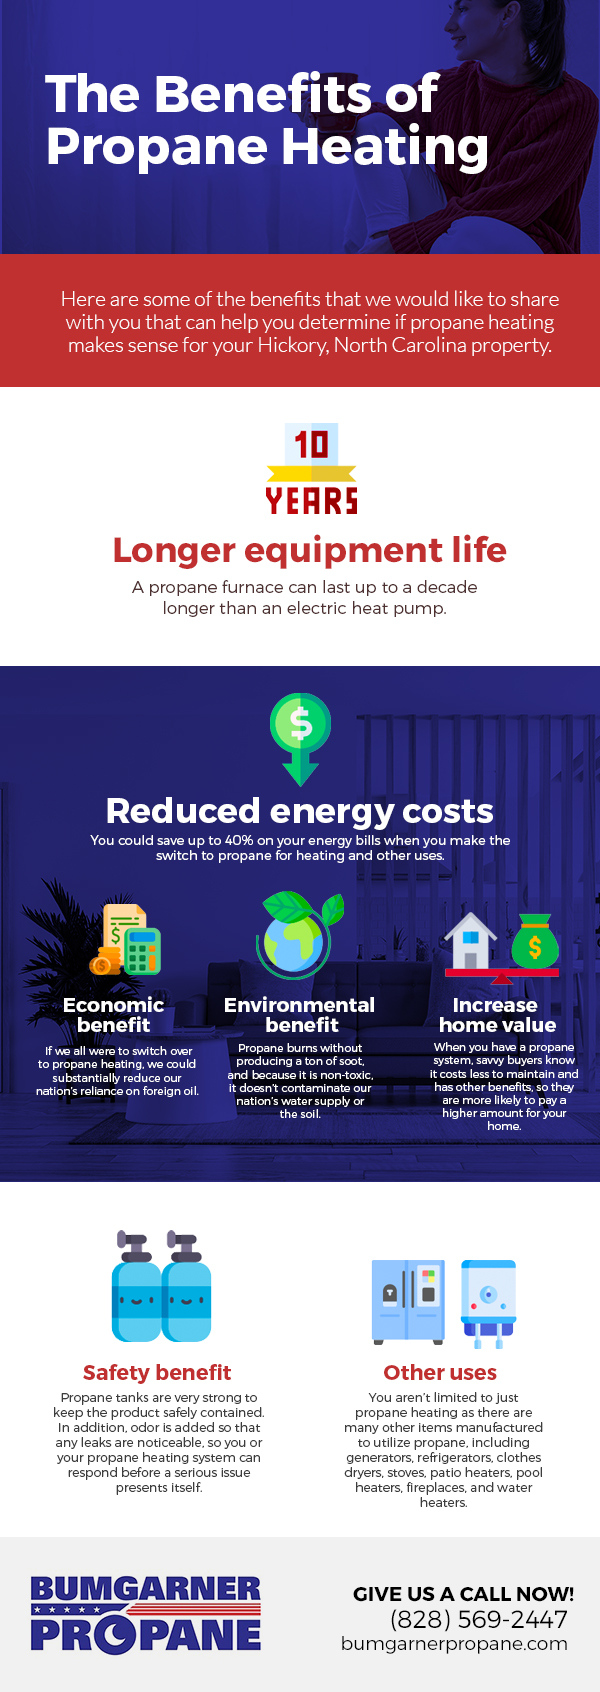 The Benefits of Propane Heating [infographic]